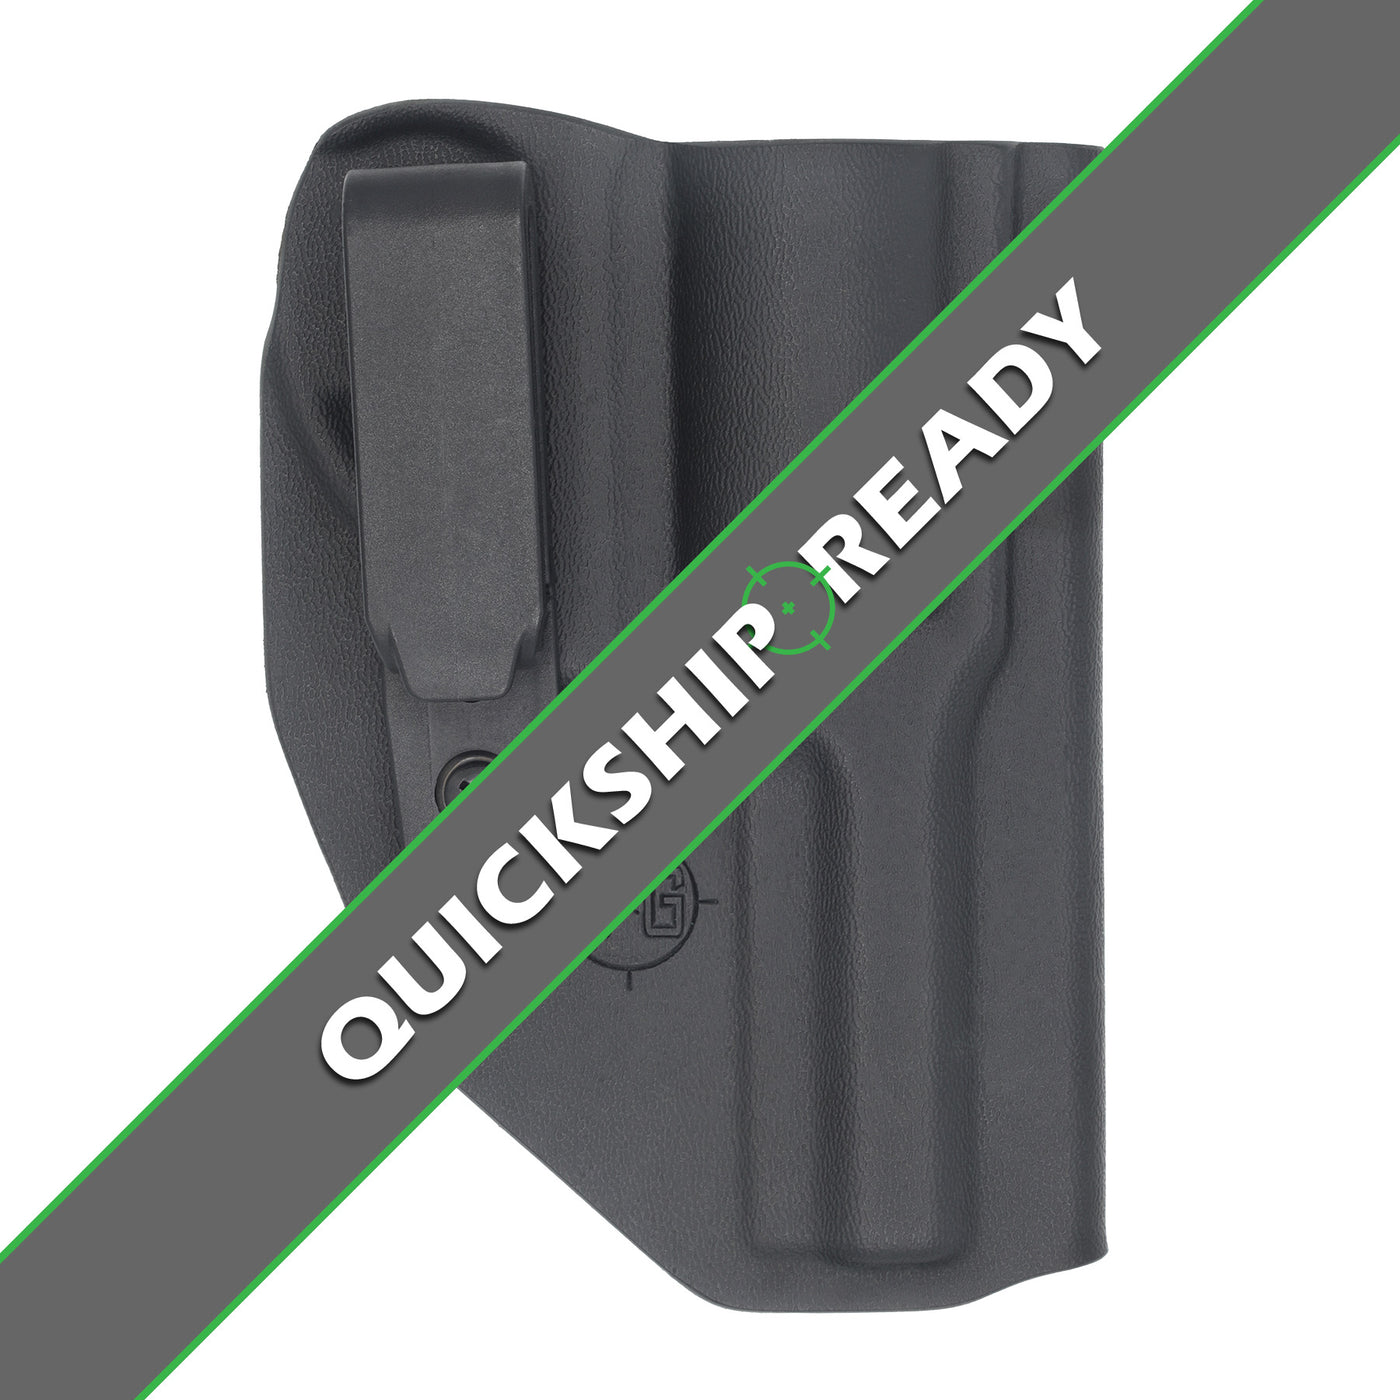 This is the C&G Holsters quickship Covert series inside the waistband holster for the Ruger LCR revolver in right hand